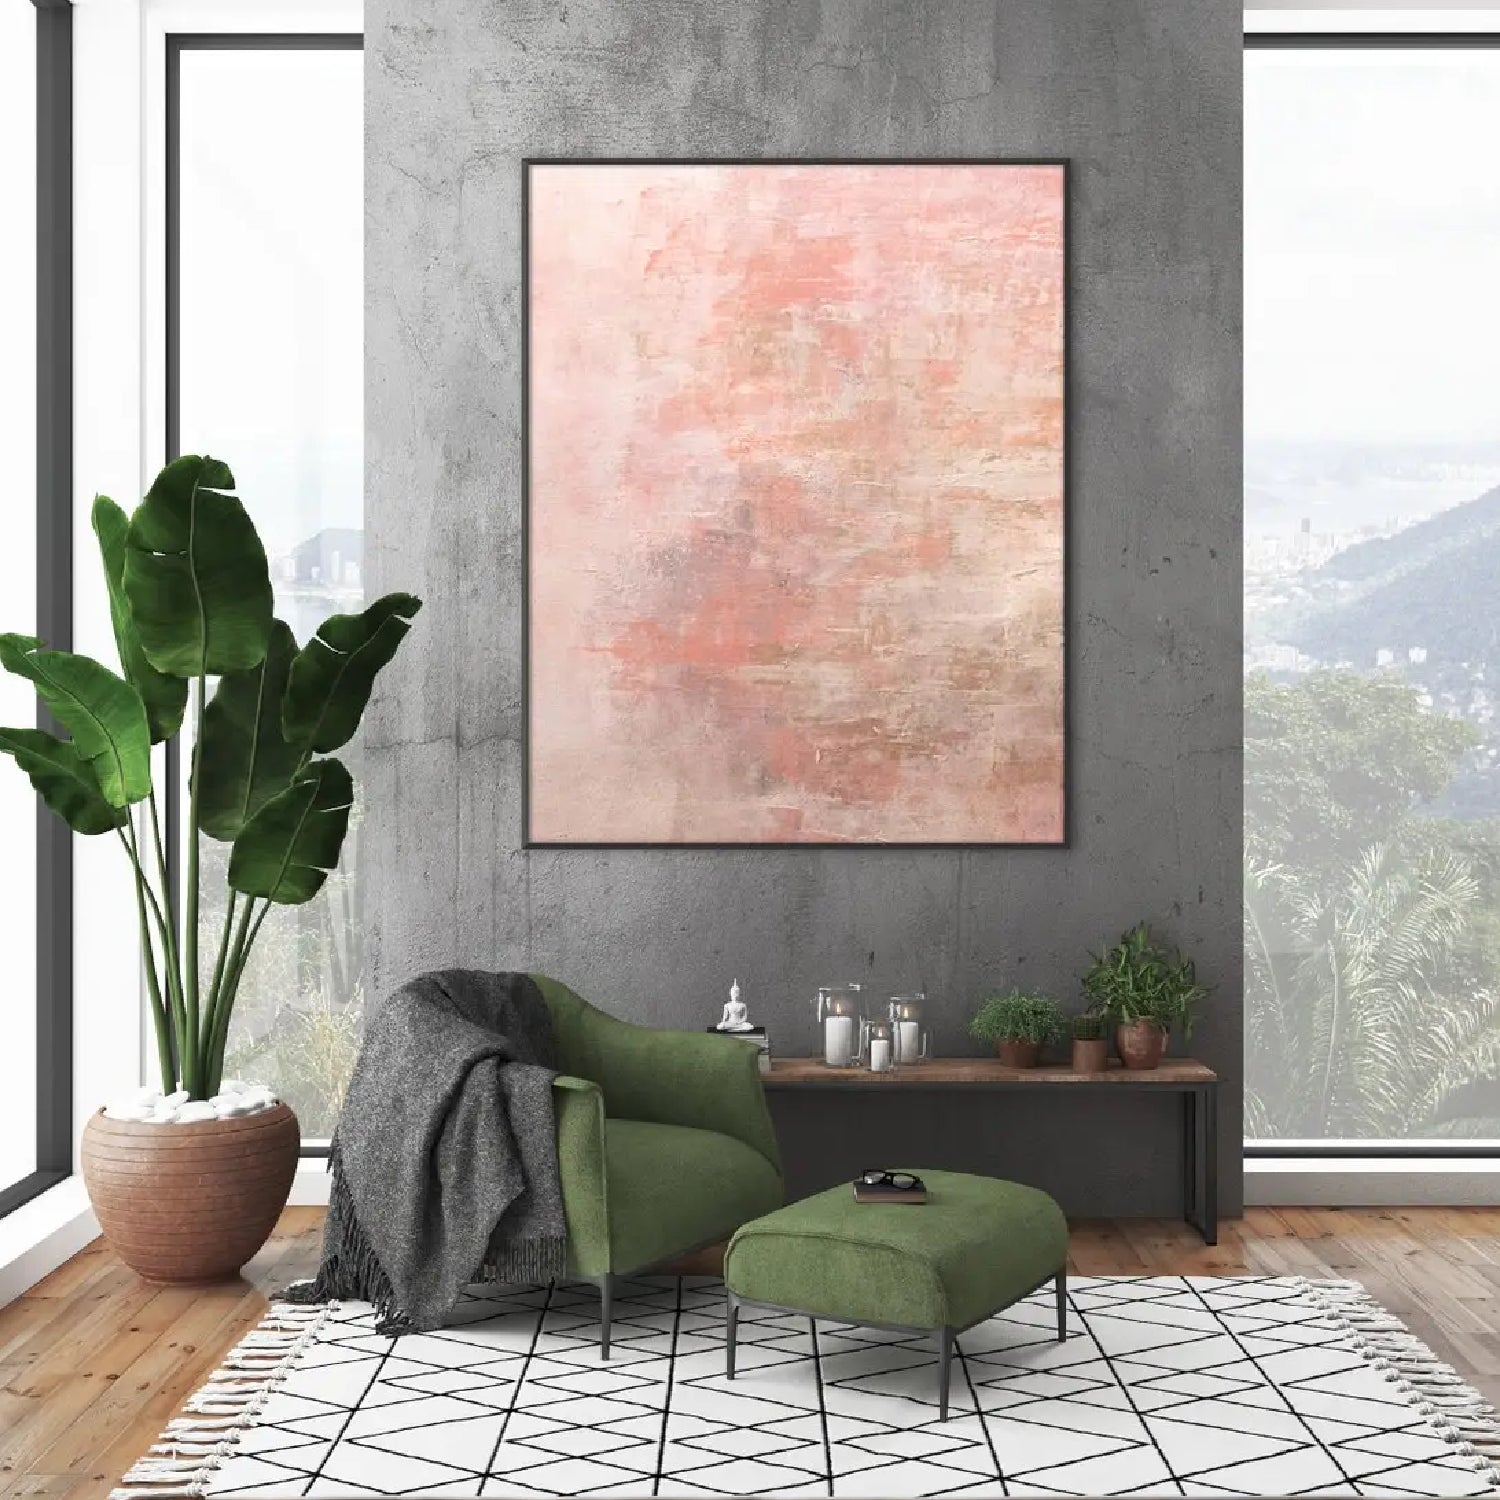 Abstract Pink Concrete Style Heavy Textured Art